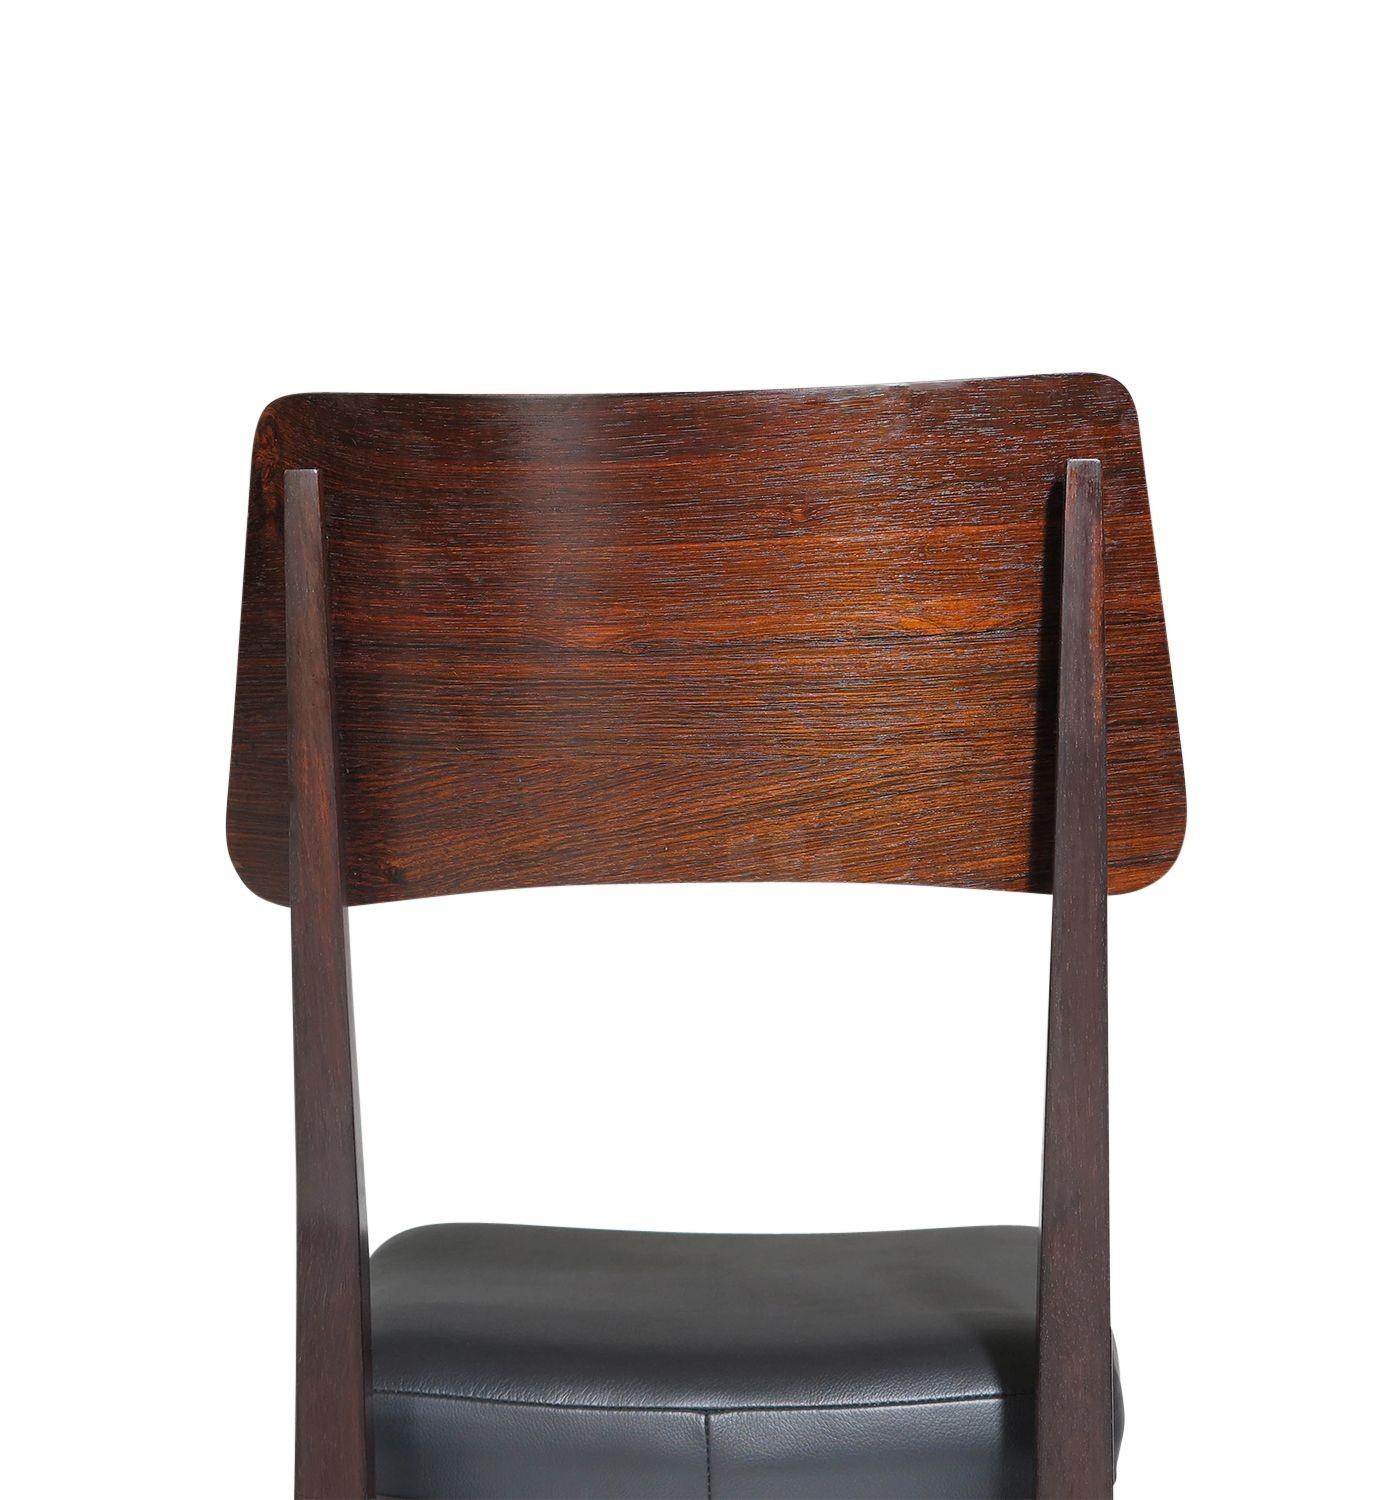 Forma Brazil Rosewood Dining Chairs In Excellent Condition For Sale In Oakland, CA